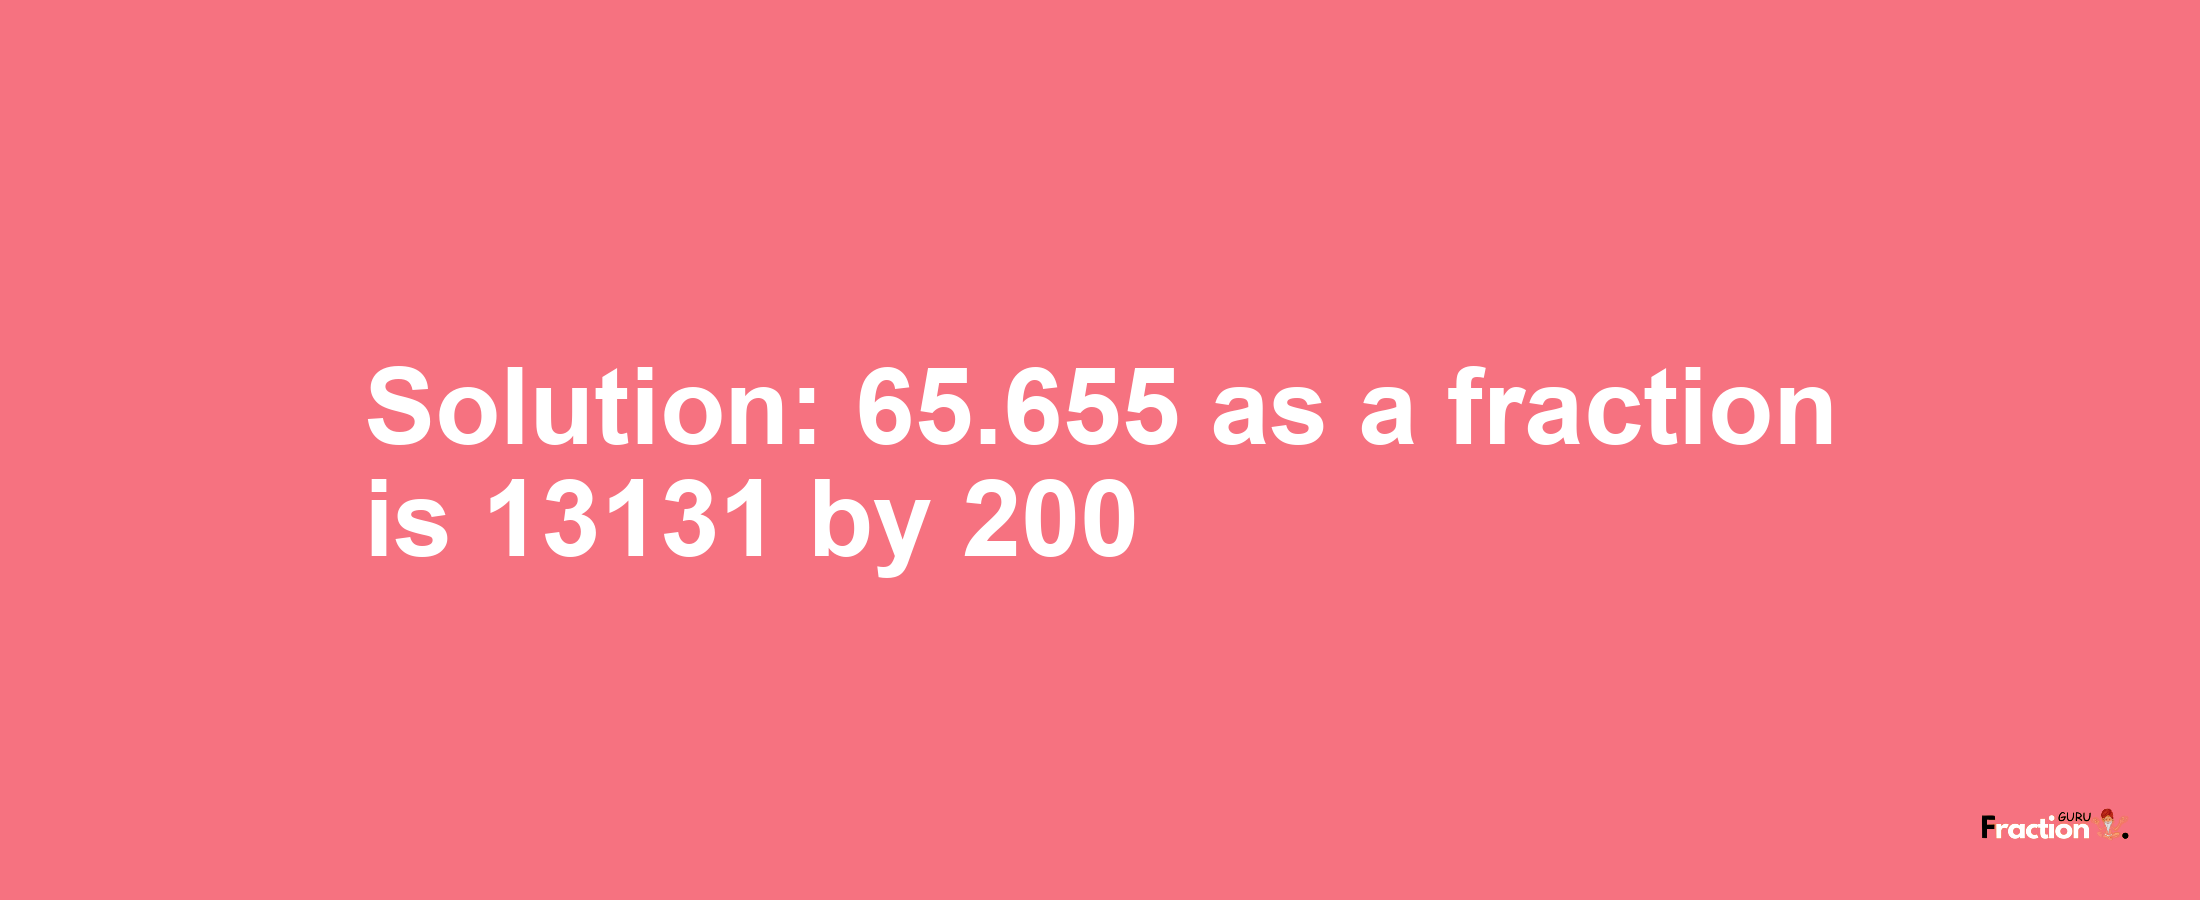 Solution:65.655 as a fraction is 13131/200